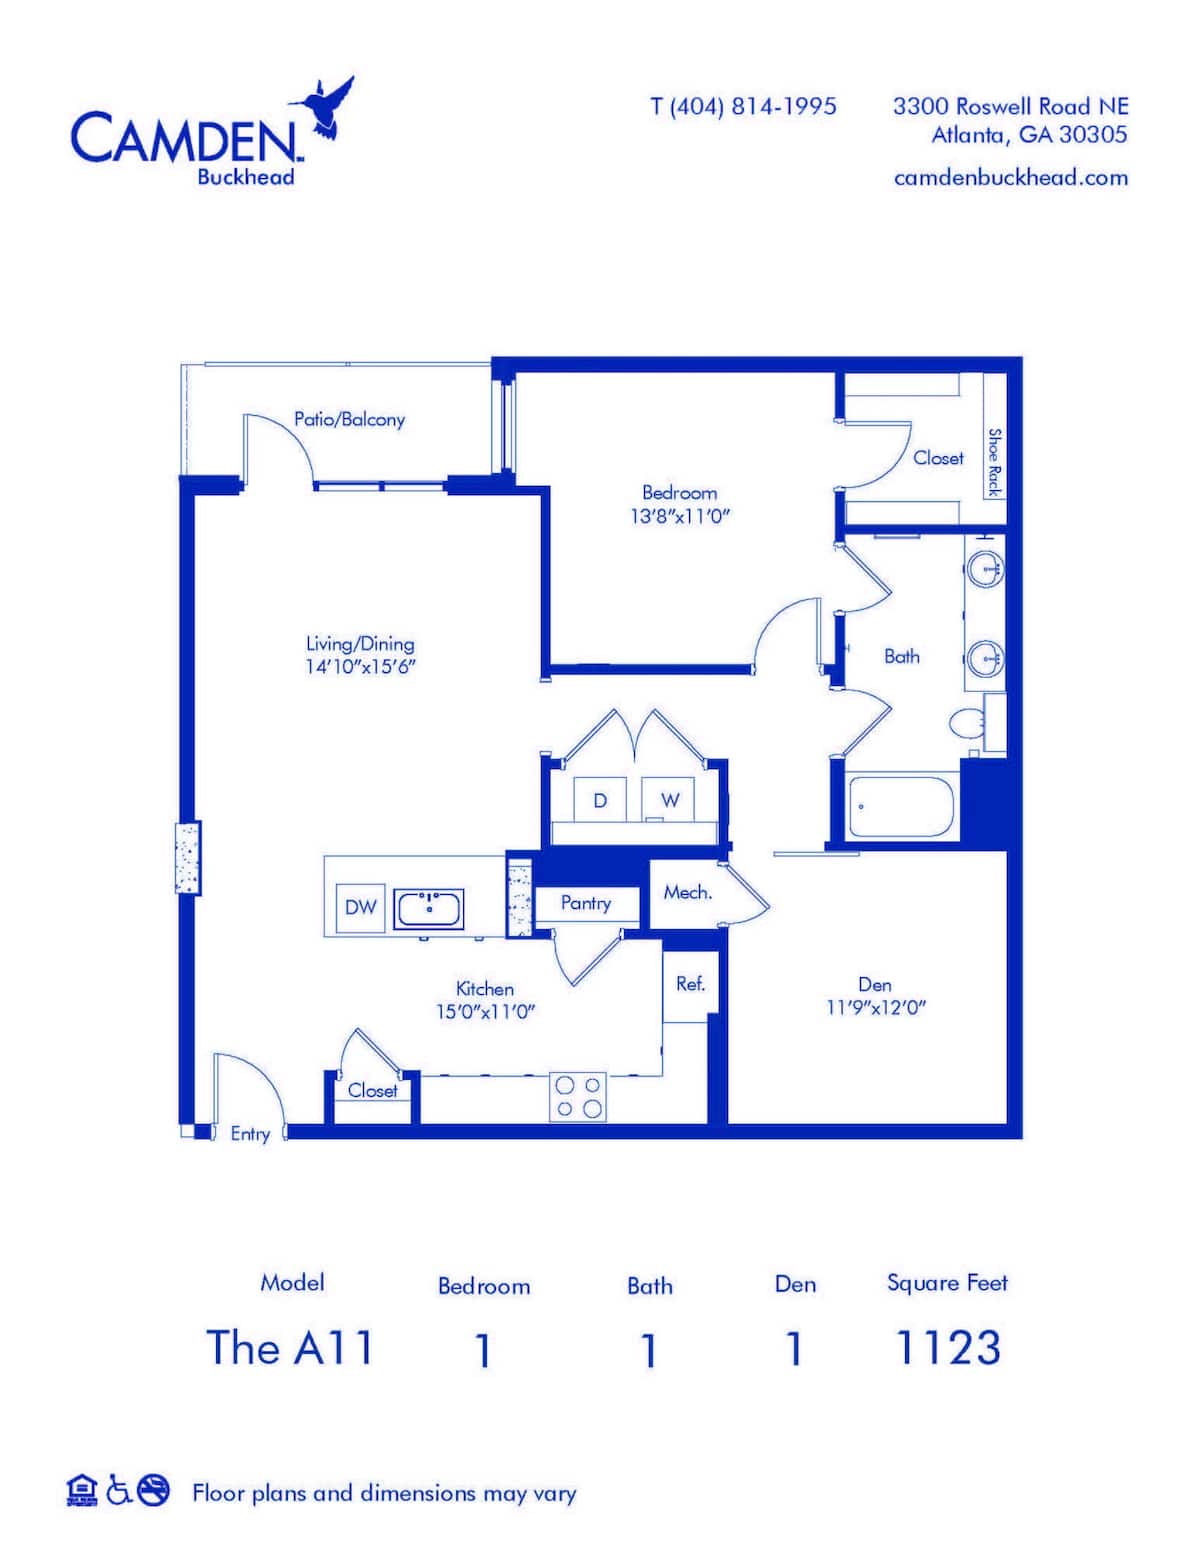 Floorplan diagram for The A11, showing 1 bedroom